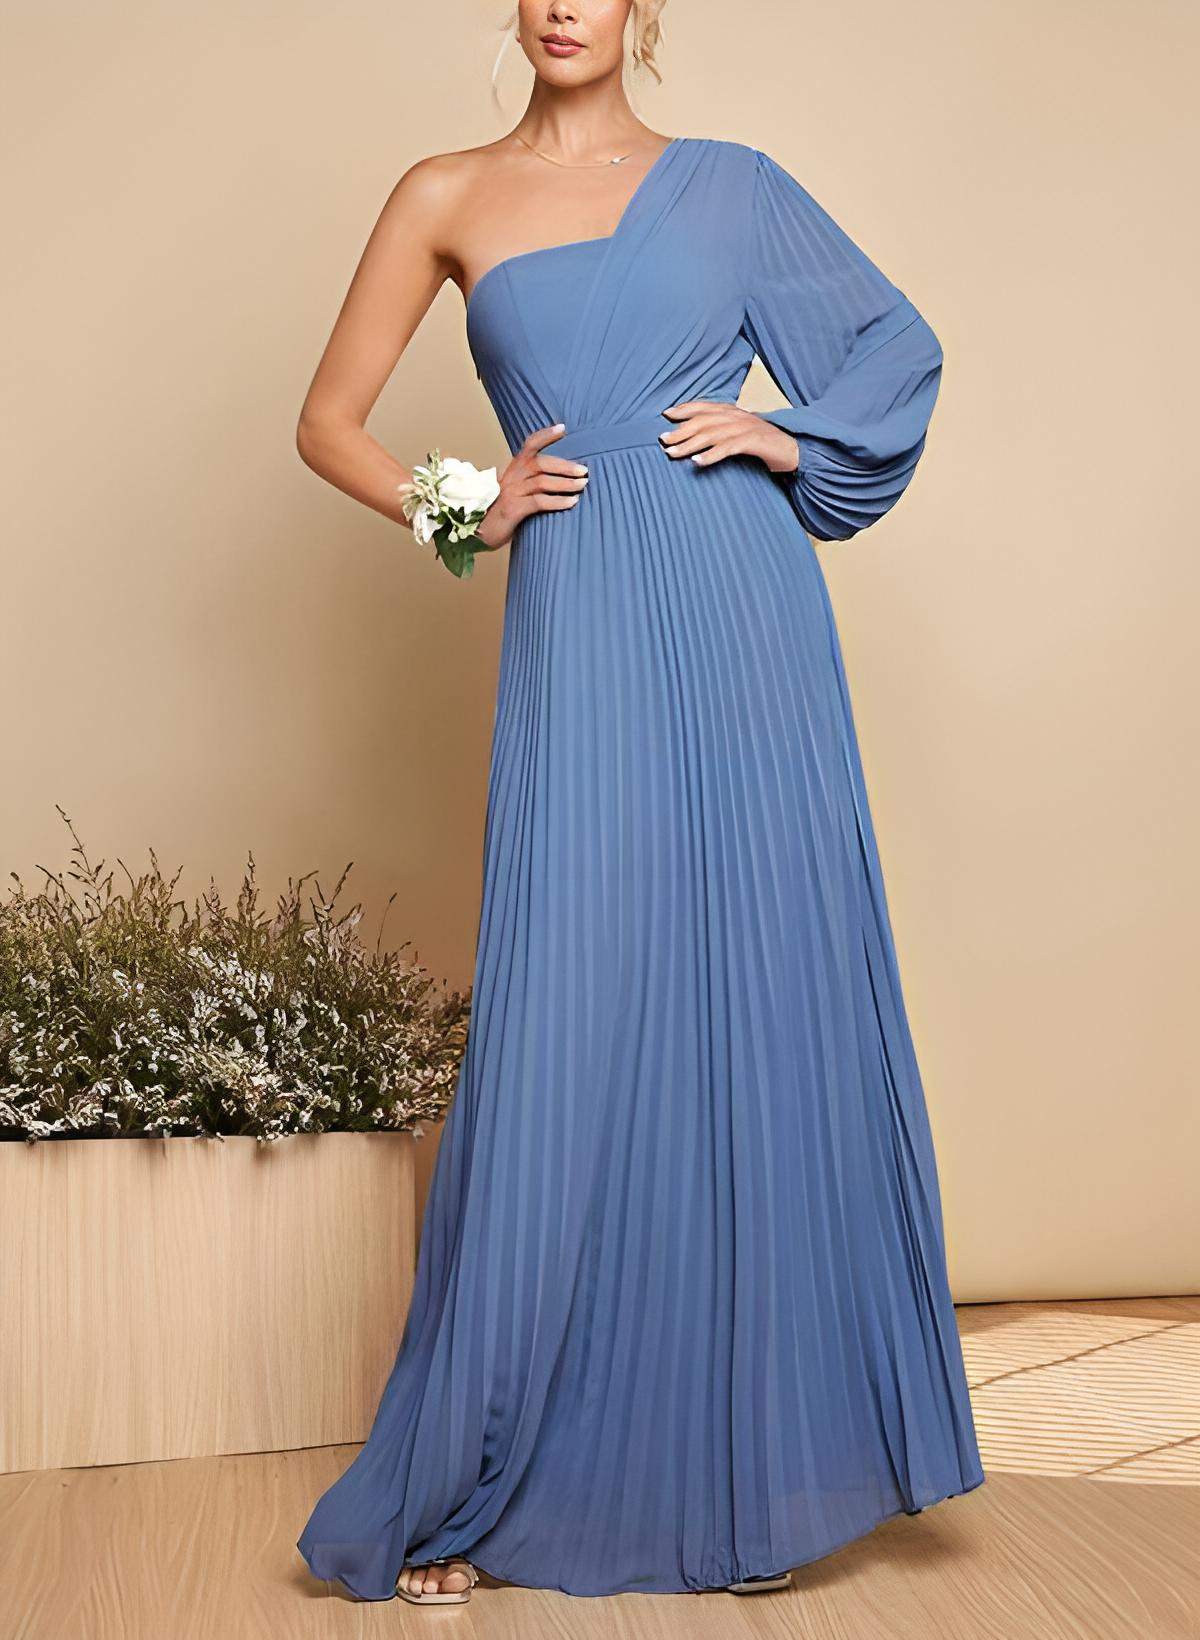 A-Line One-Shoulder Long Sleeves Floor-Length Chiffon Bridesmaid Dresses With Pleated